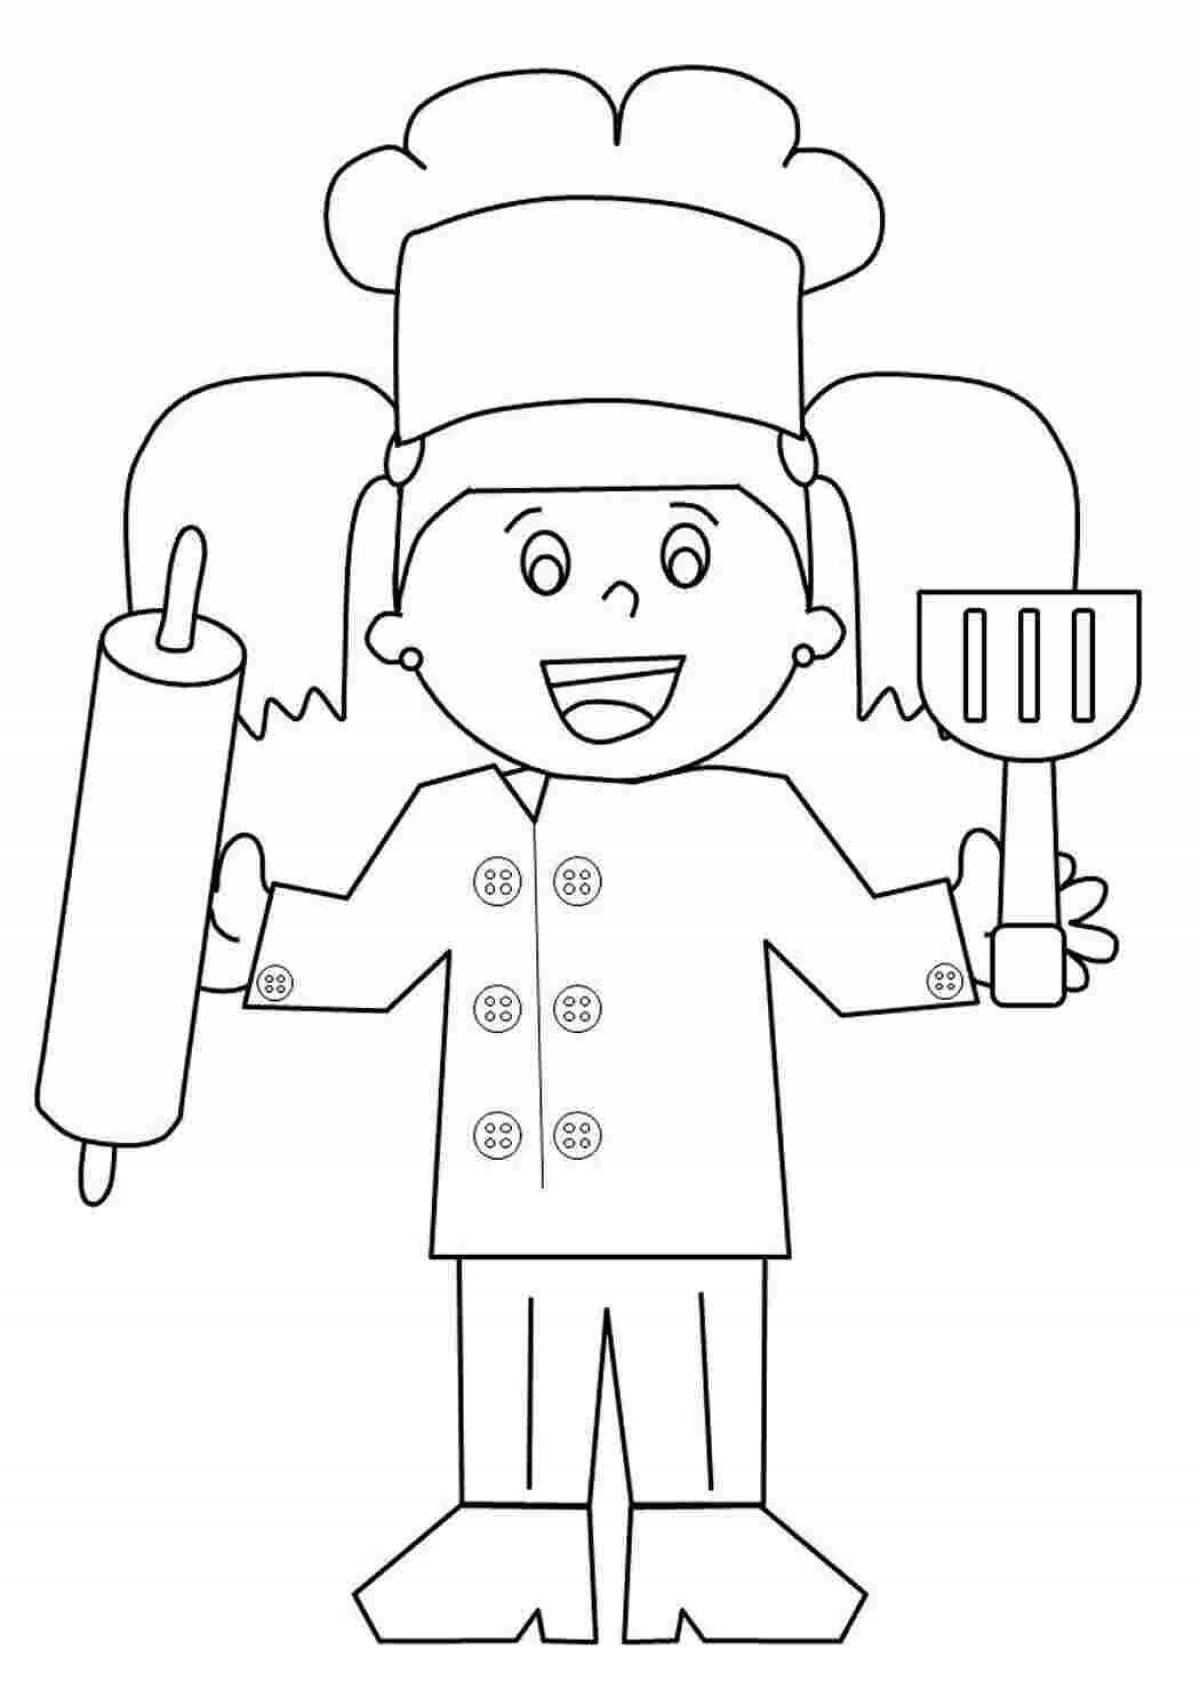 Colored festive pastry chef coloring book